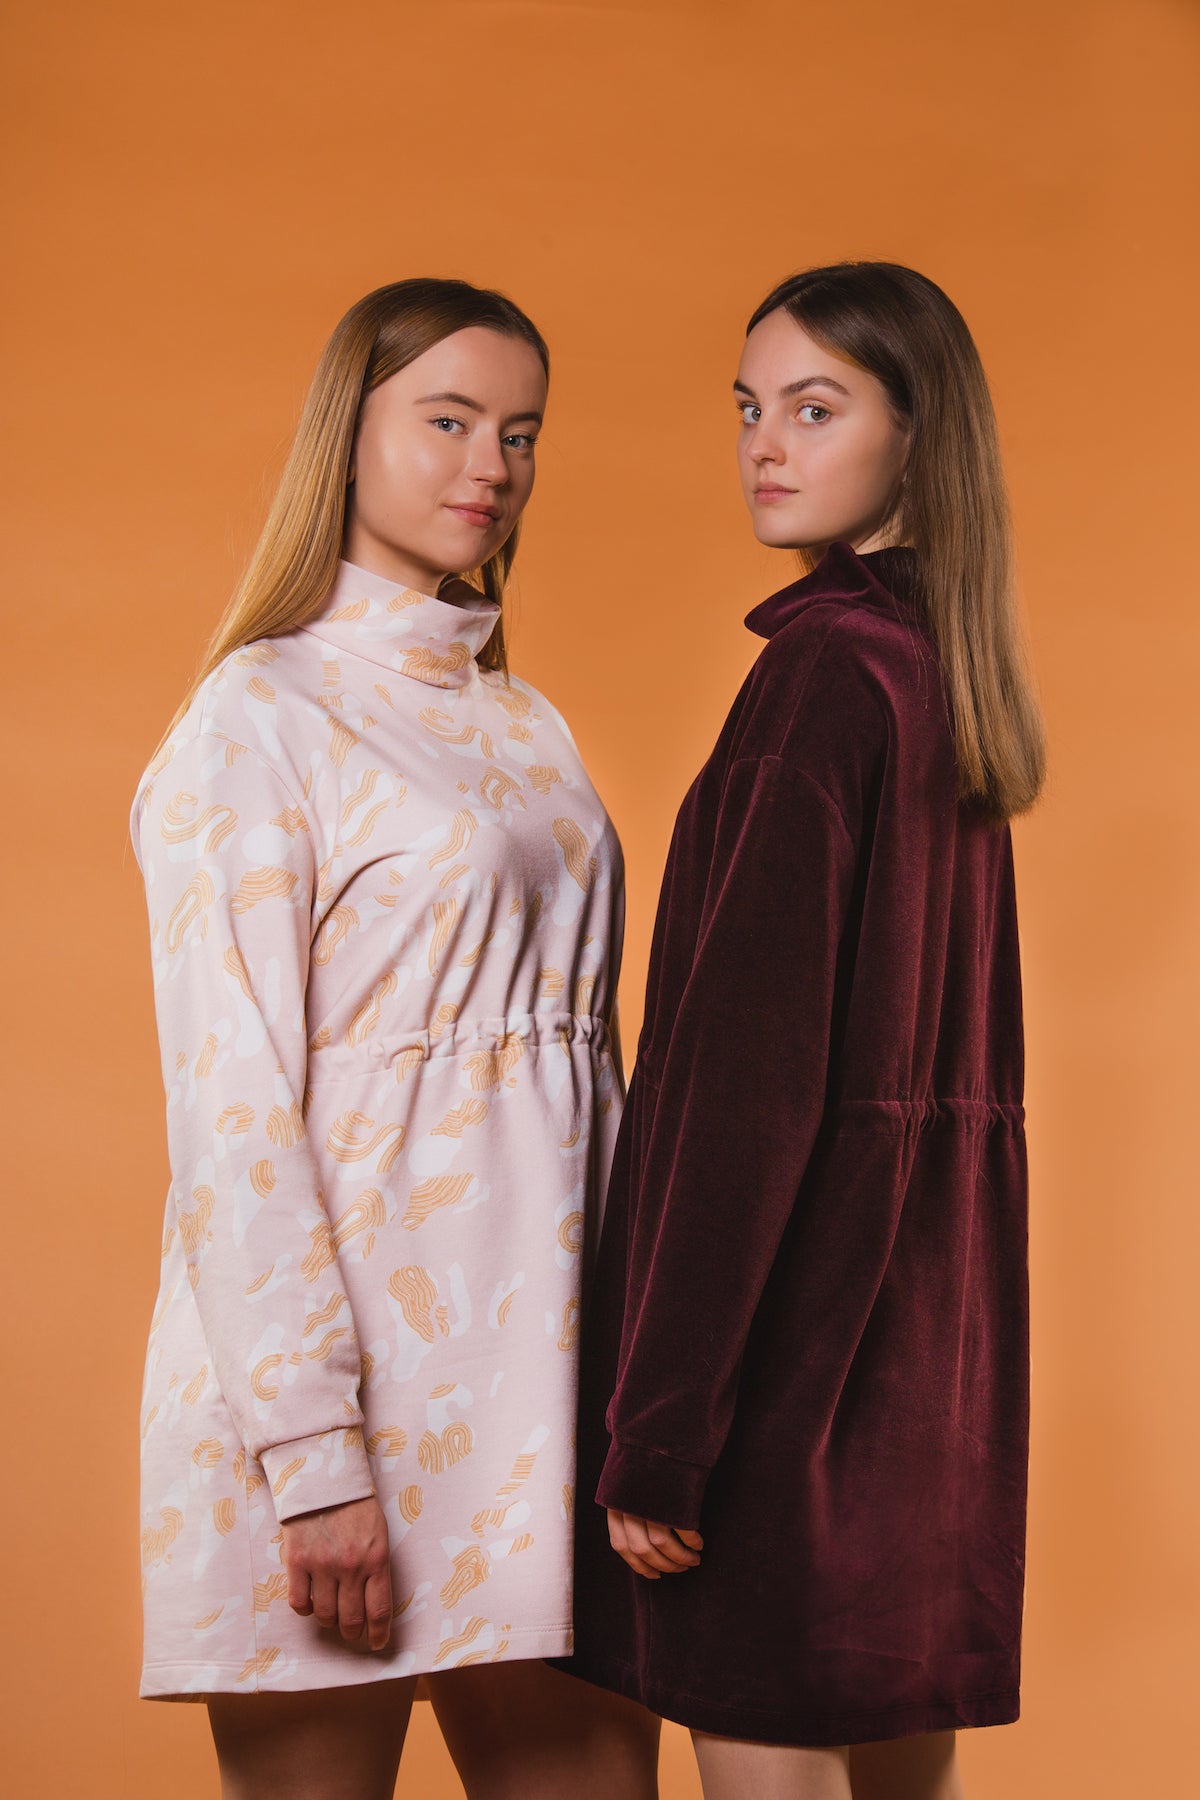 New collection of eco friendly clothing inspired by the Lappish light and landscapes - MORICO slow fashion from Finland